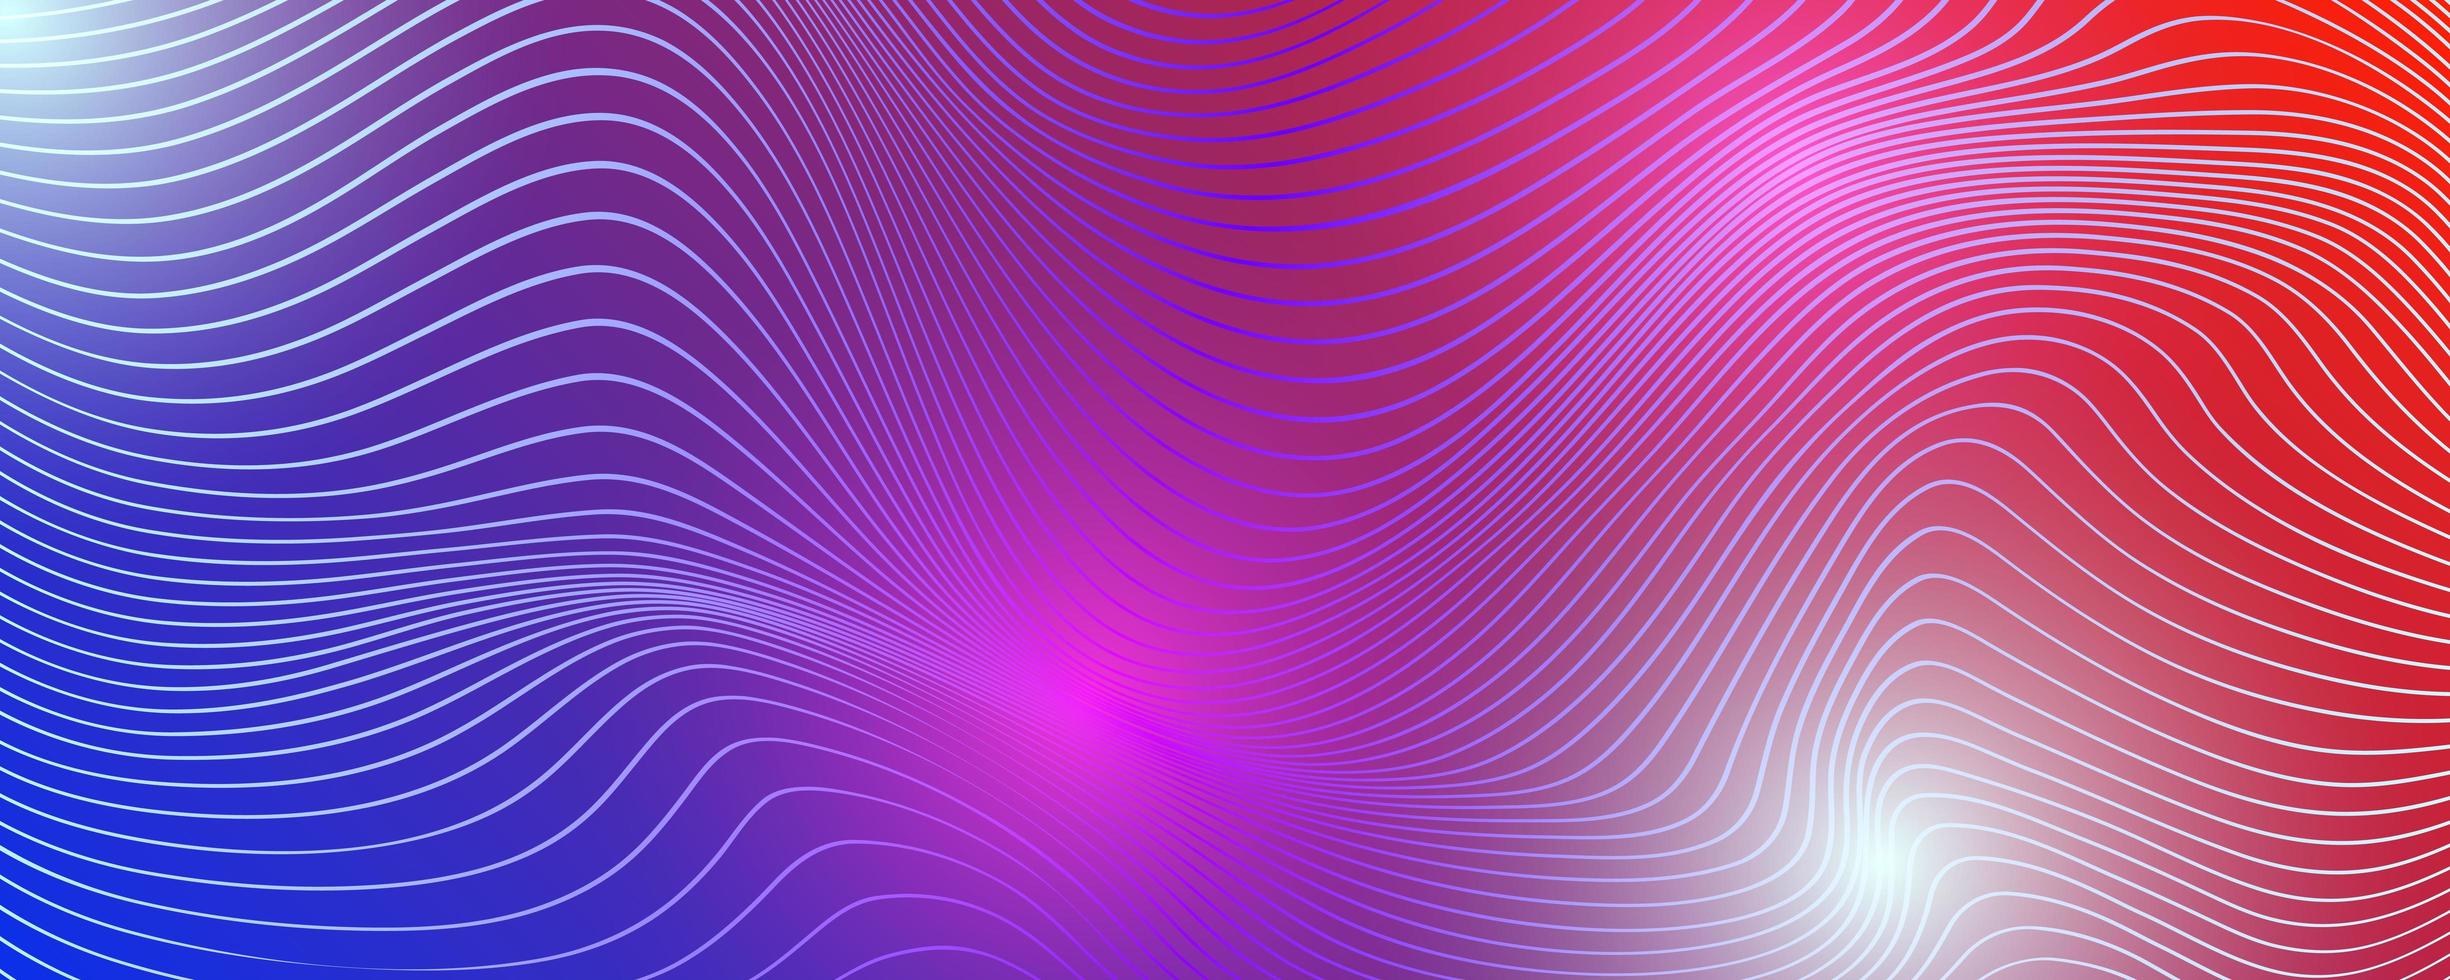 Tech background with abstract wave lines. vector